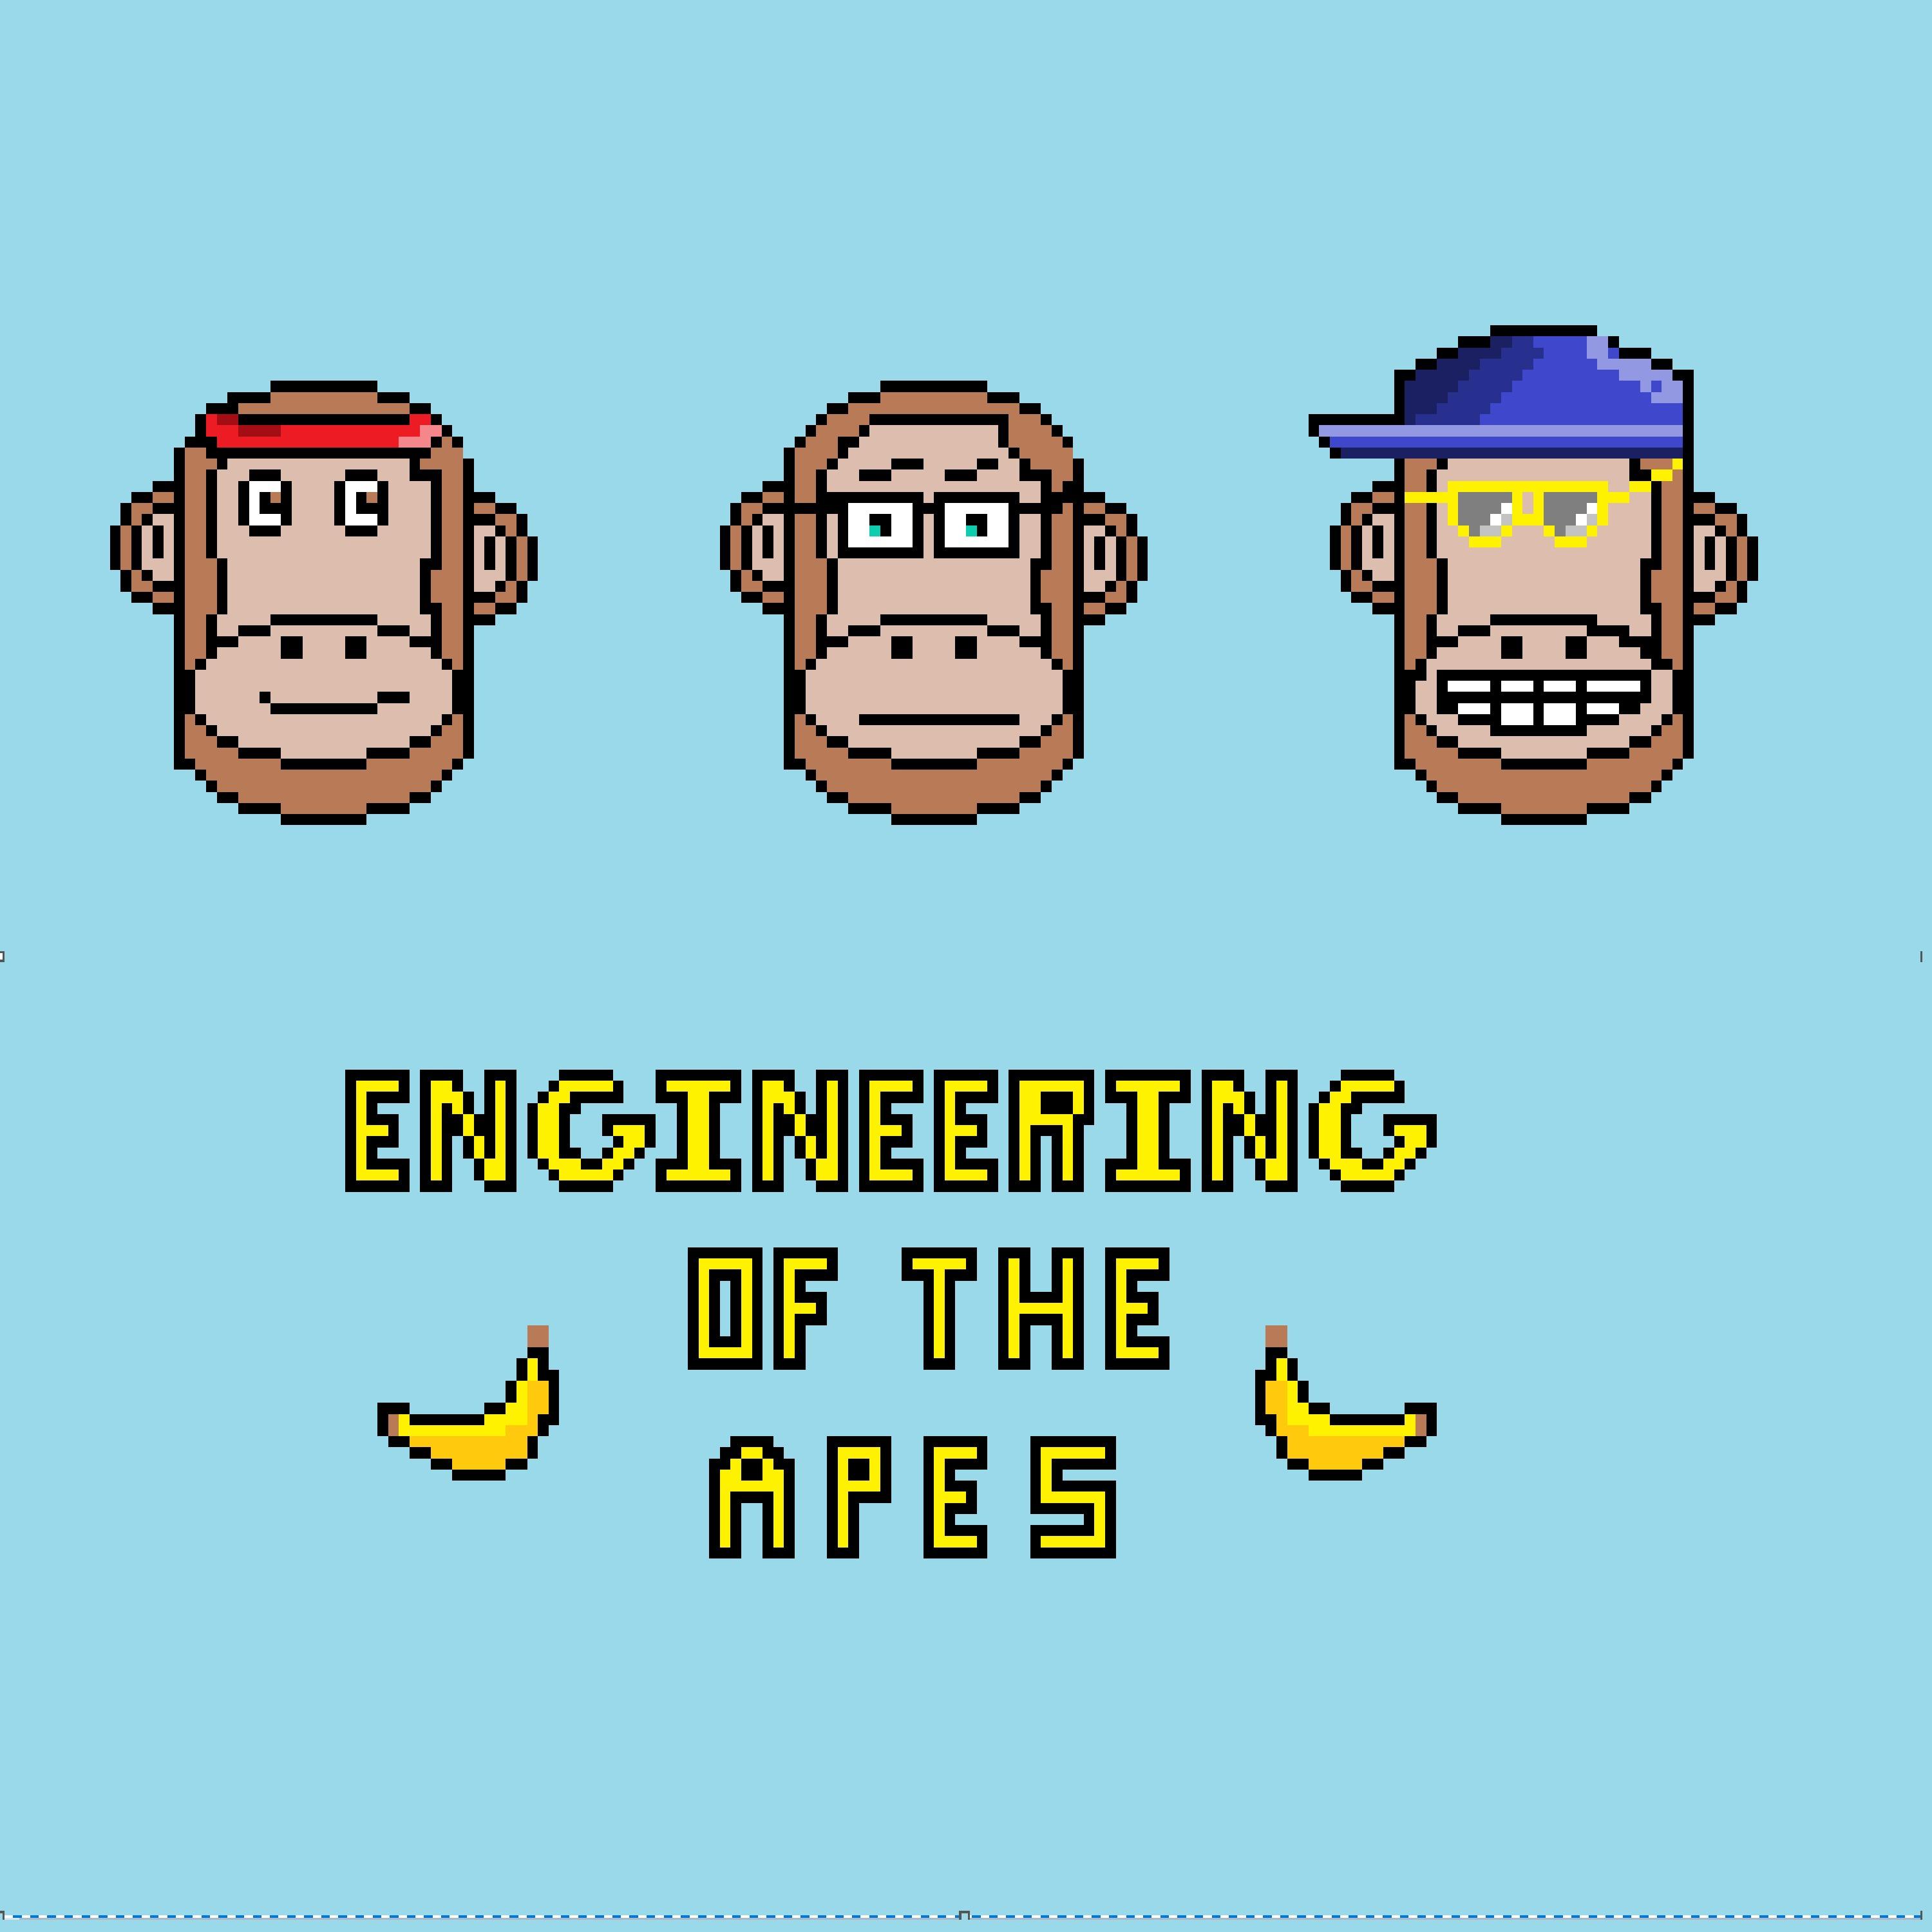 Engineering of the Apes